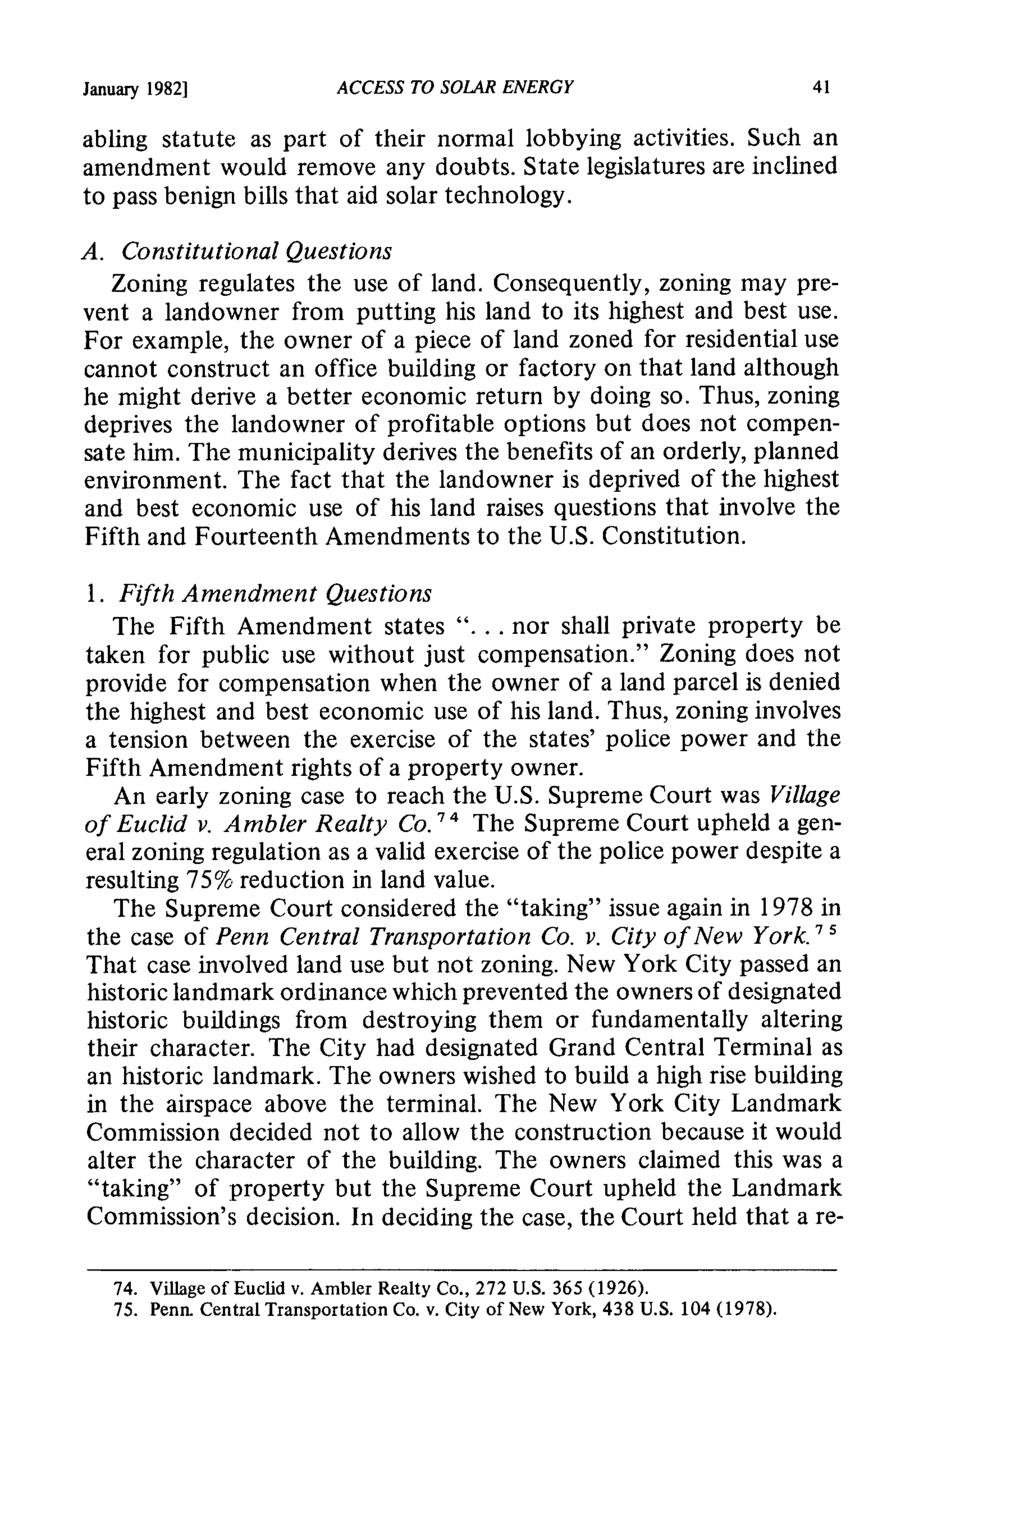 January 19821 ACCESS TO SOLAR ENERGY abling statute as part of their normal lobbying activities. Such an amendment would remove any doubts.